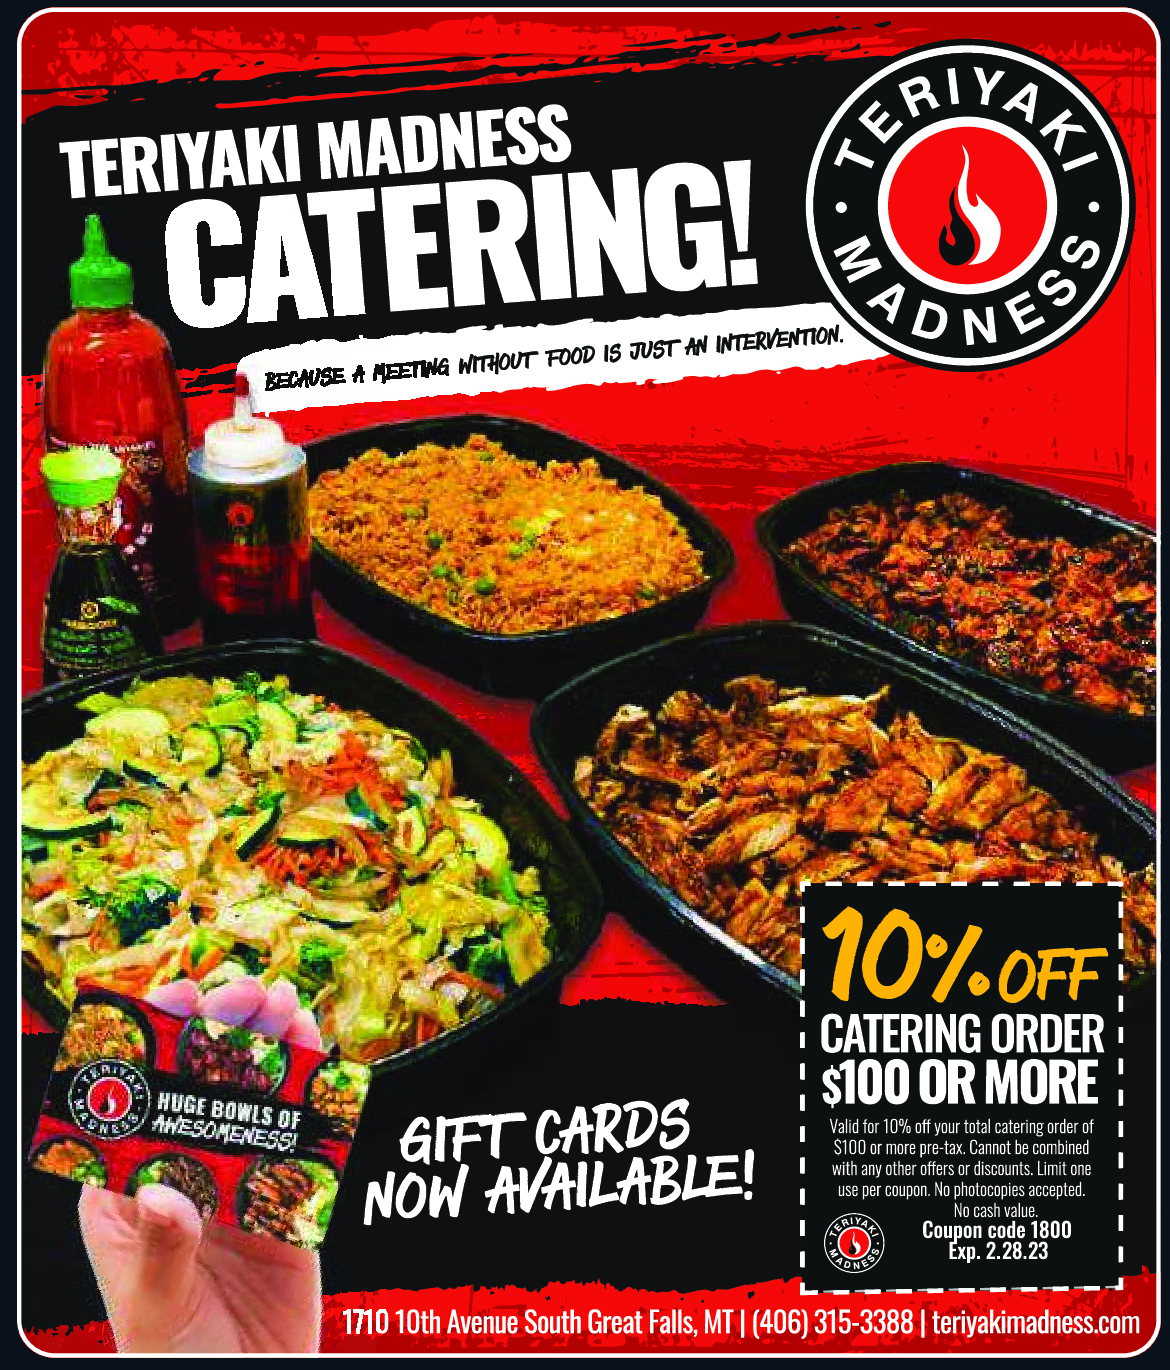 Discounted catering coupons